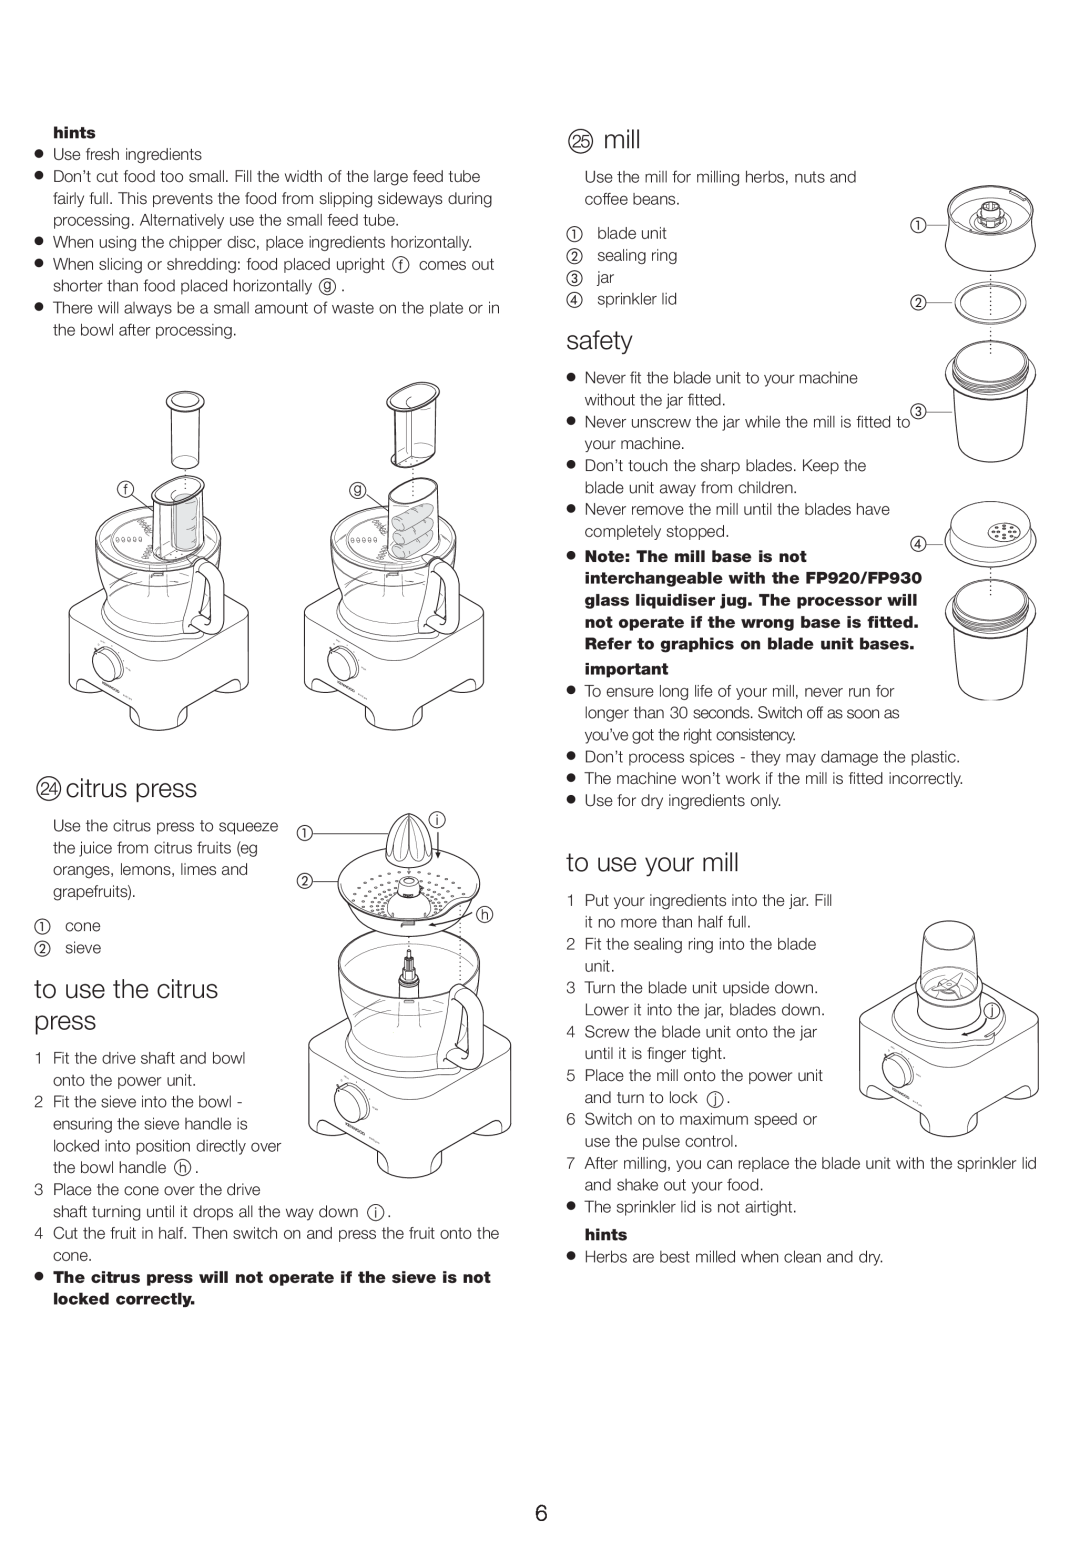 Kenwood FP905, FP920, FP910, FP930 manual to use your mill, to use the citrus press, safety 